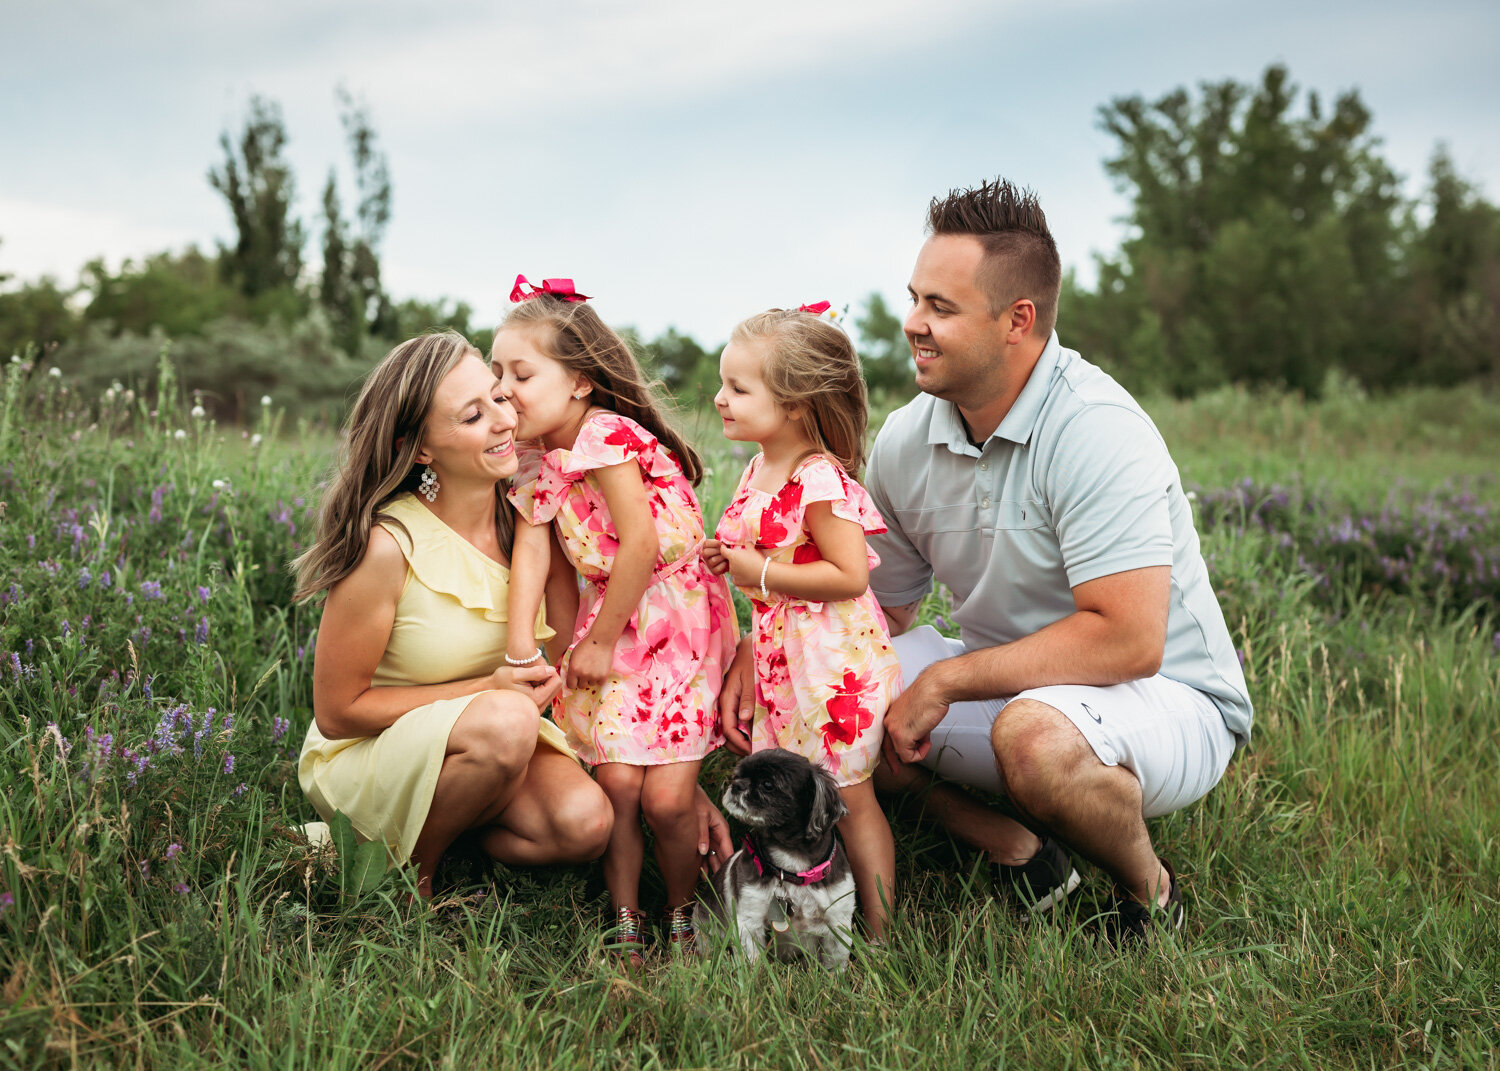  young daughter giving mom a kiss while dad and sister watch during photoshoot in the grass and flowers near WInnipeg 